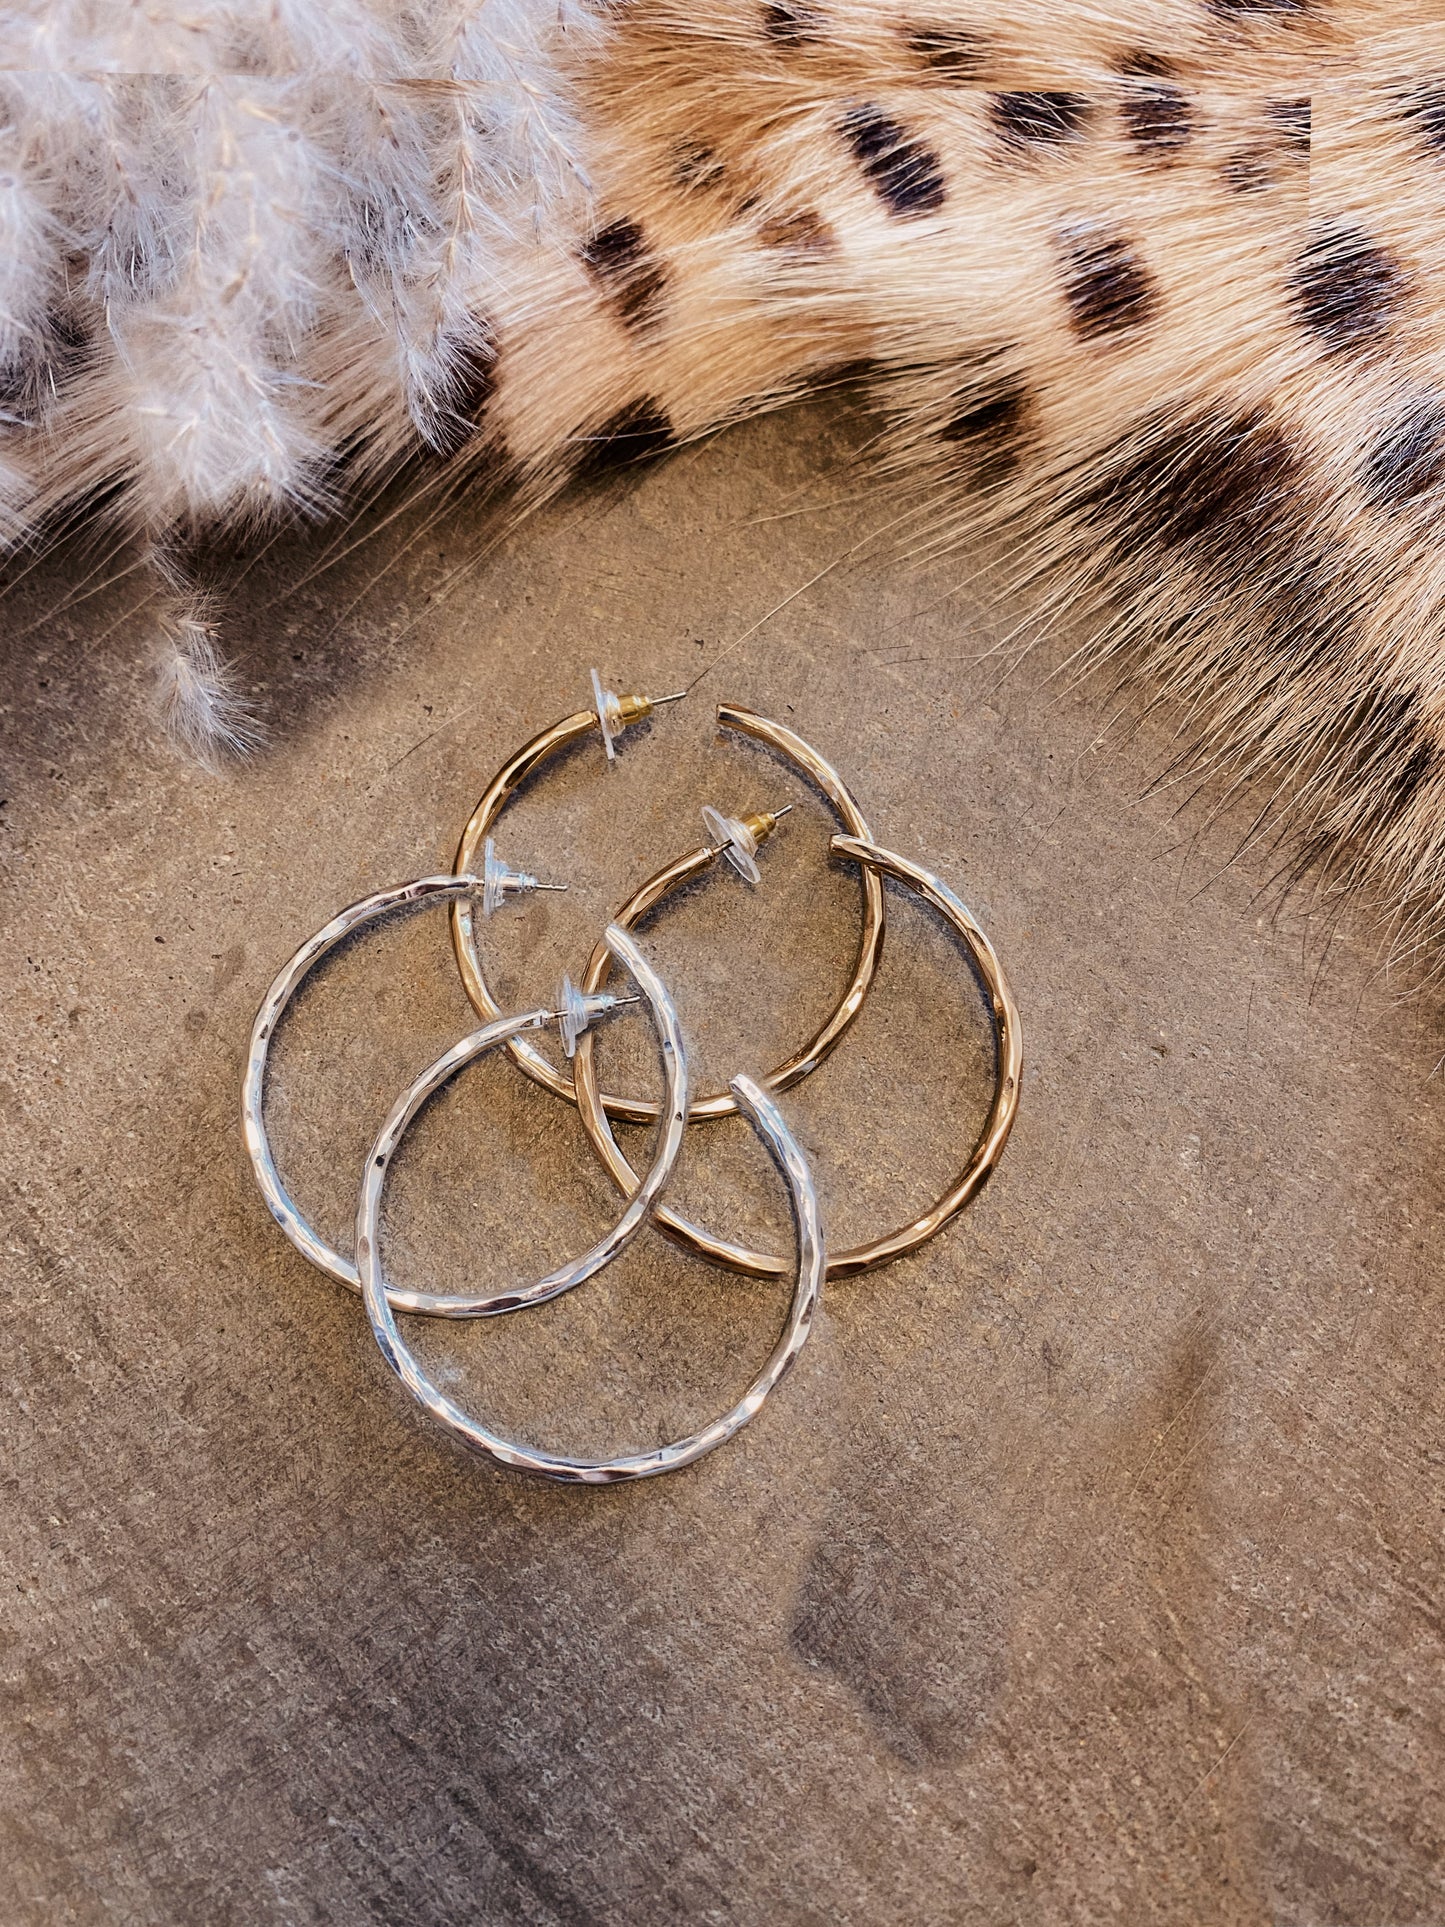 The Hammered Hoops